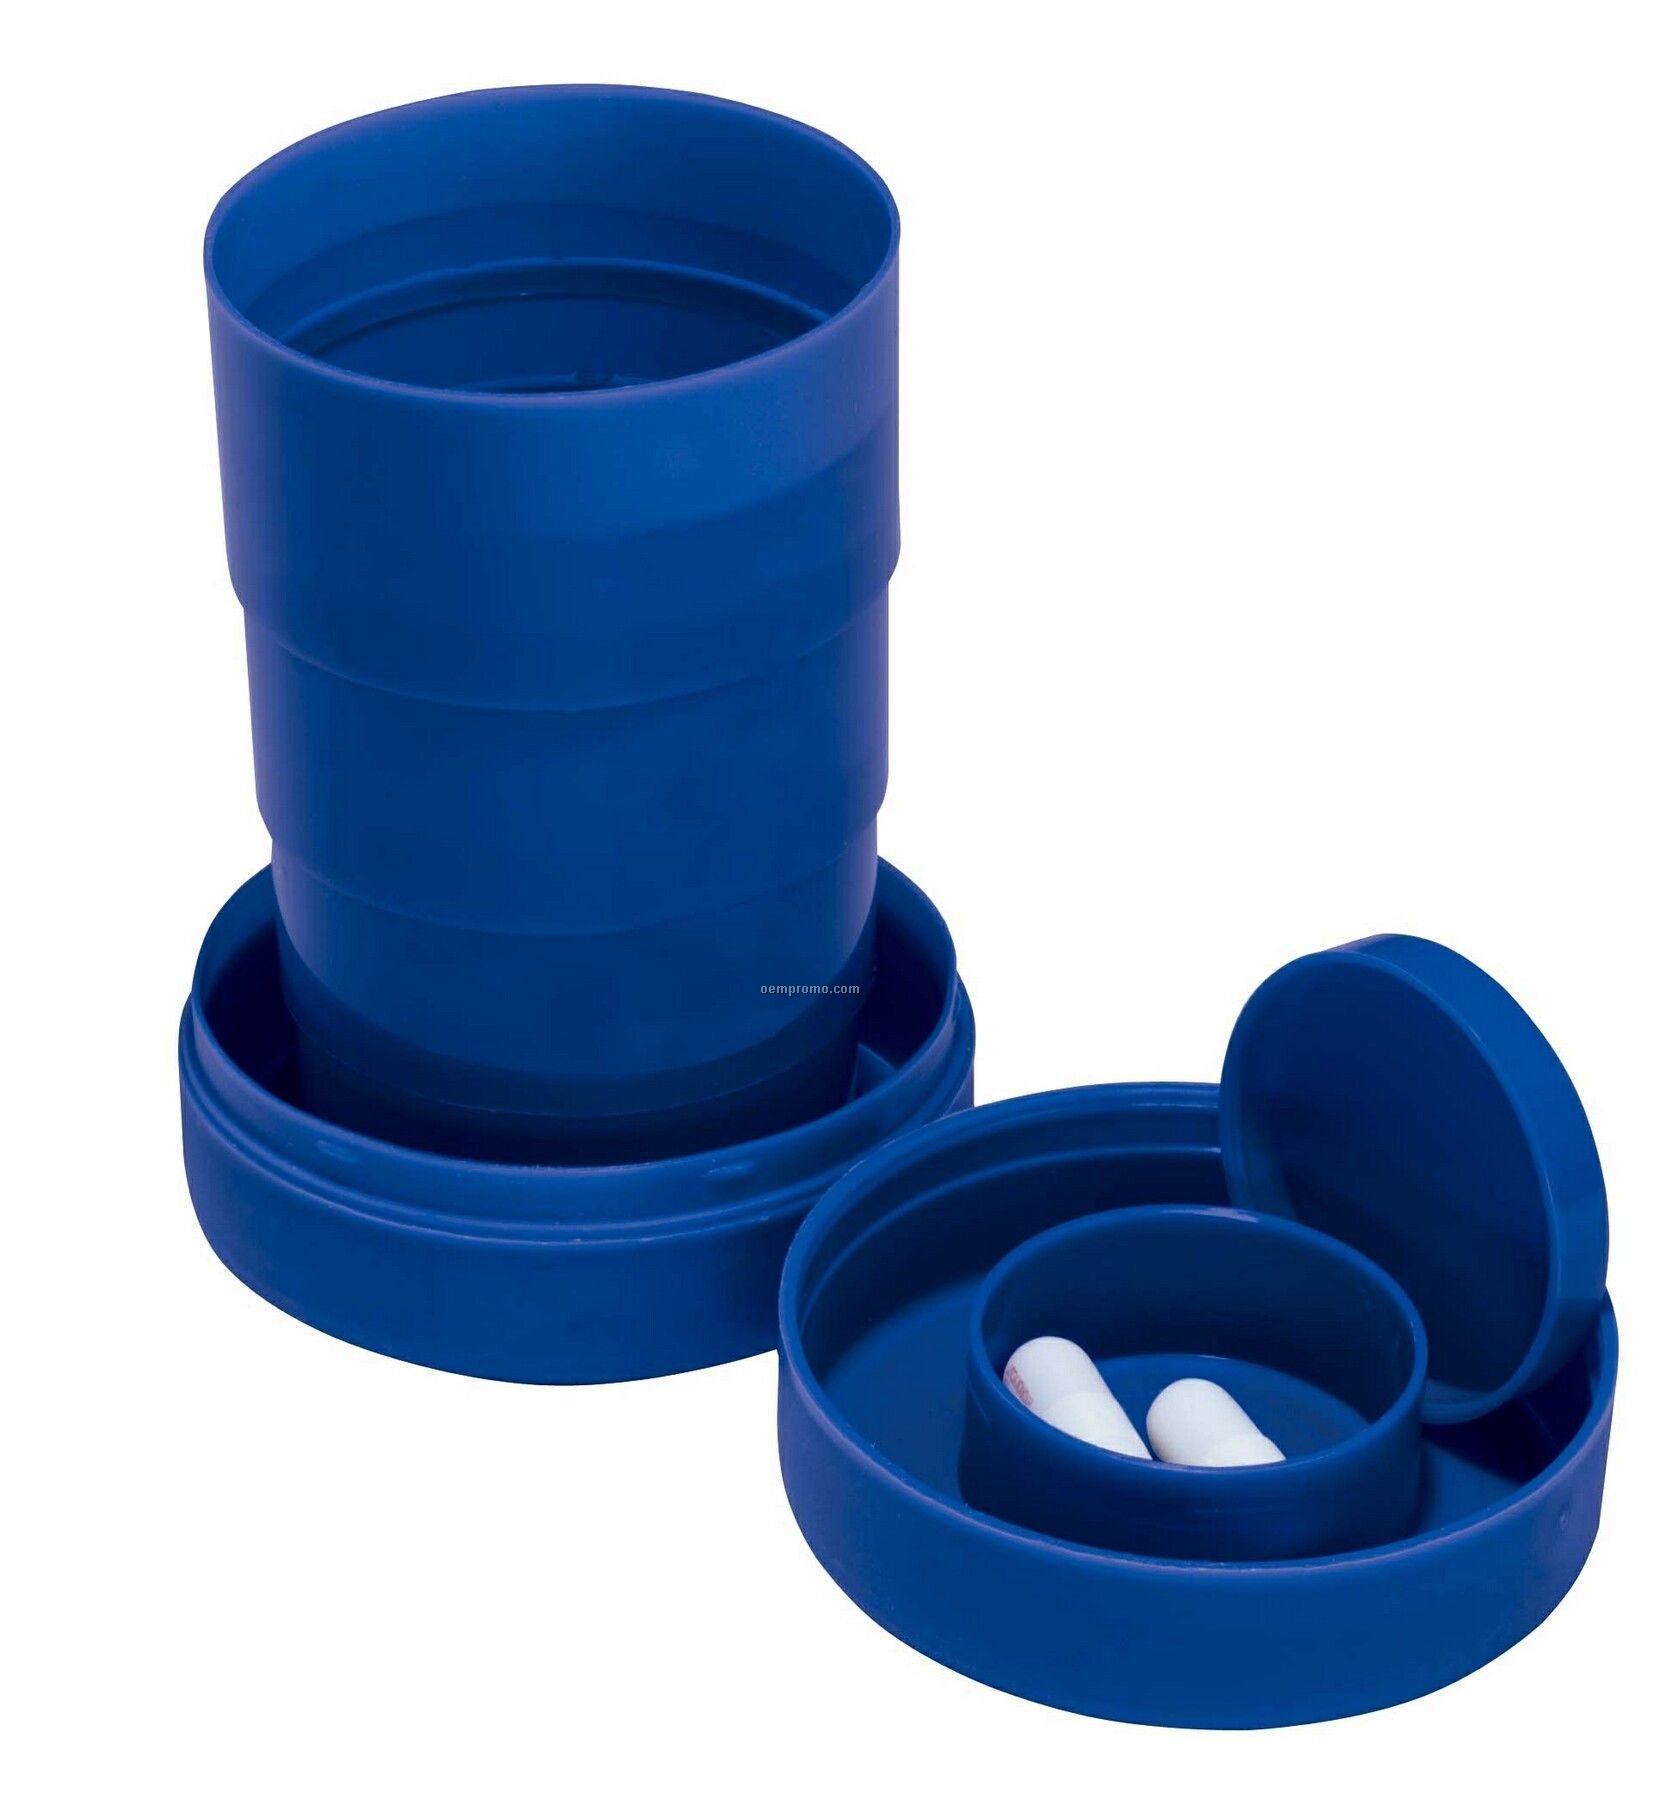 Pillowline Travel Cup W/ Pill Compartment